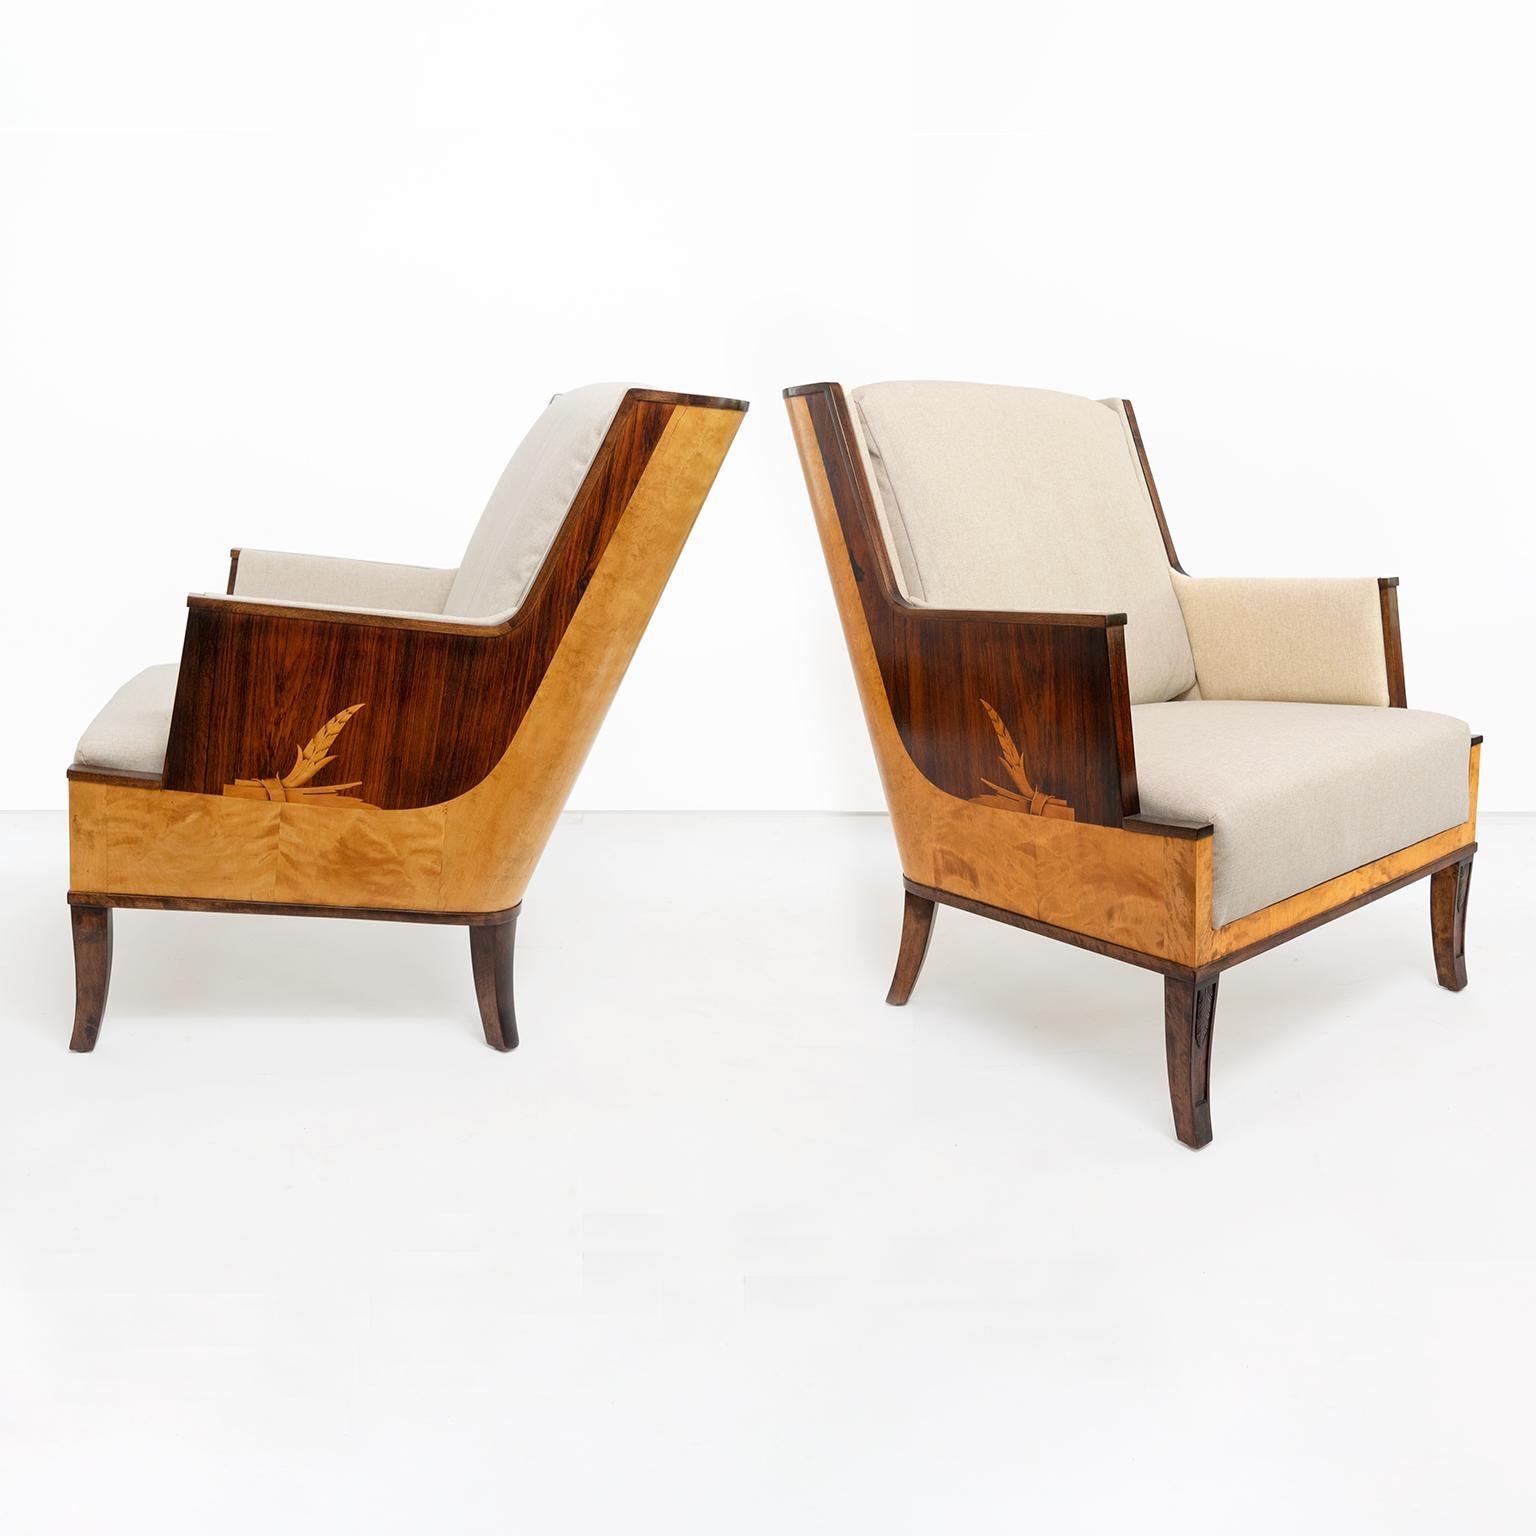 Elegant pair of Swedish art deco armchairs / lounge chairs designed by Erik Chambert. Chairs feature a sleek wood veneered frame in rosewood and birch veneer and a beautifully rendered marquetry design on each side. Angular arms create a modern